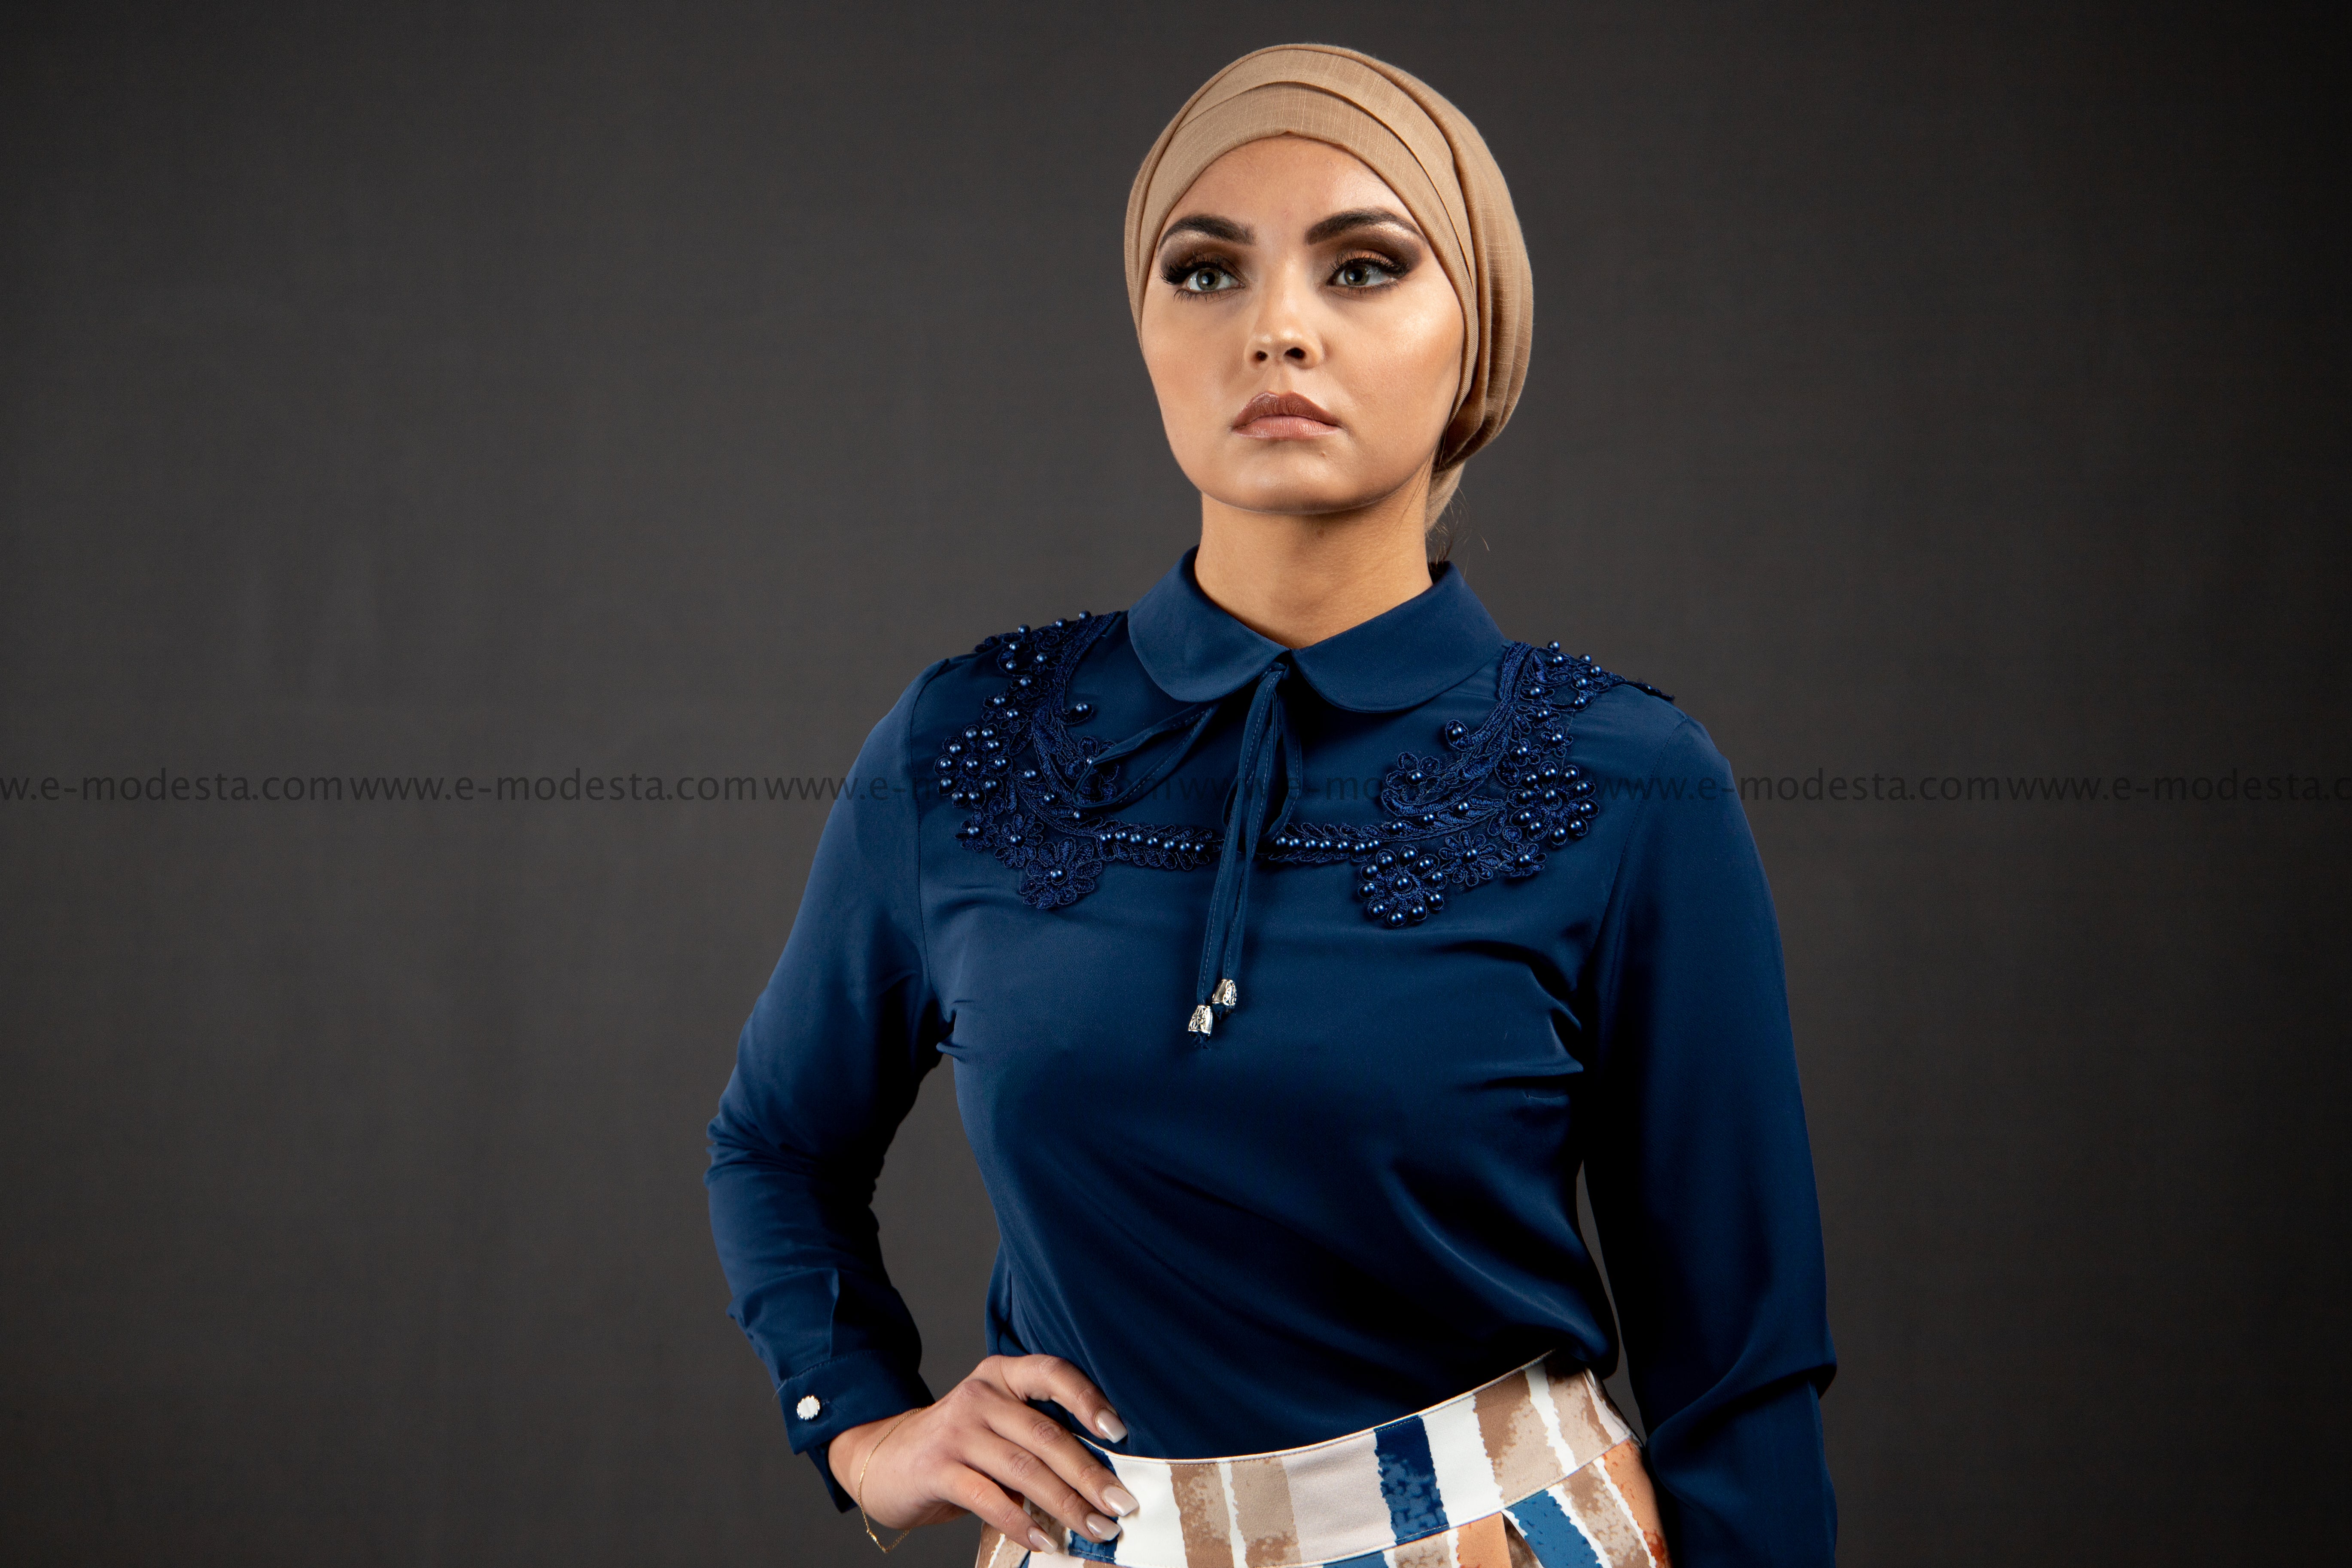 SALE Formal Dark Blue Blouse | Lace & Pearls on the Shoulders - E-Modesta